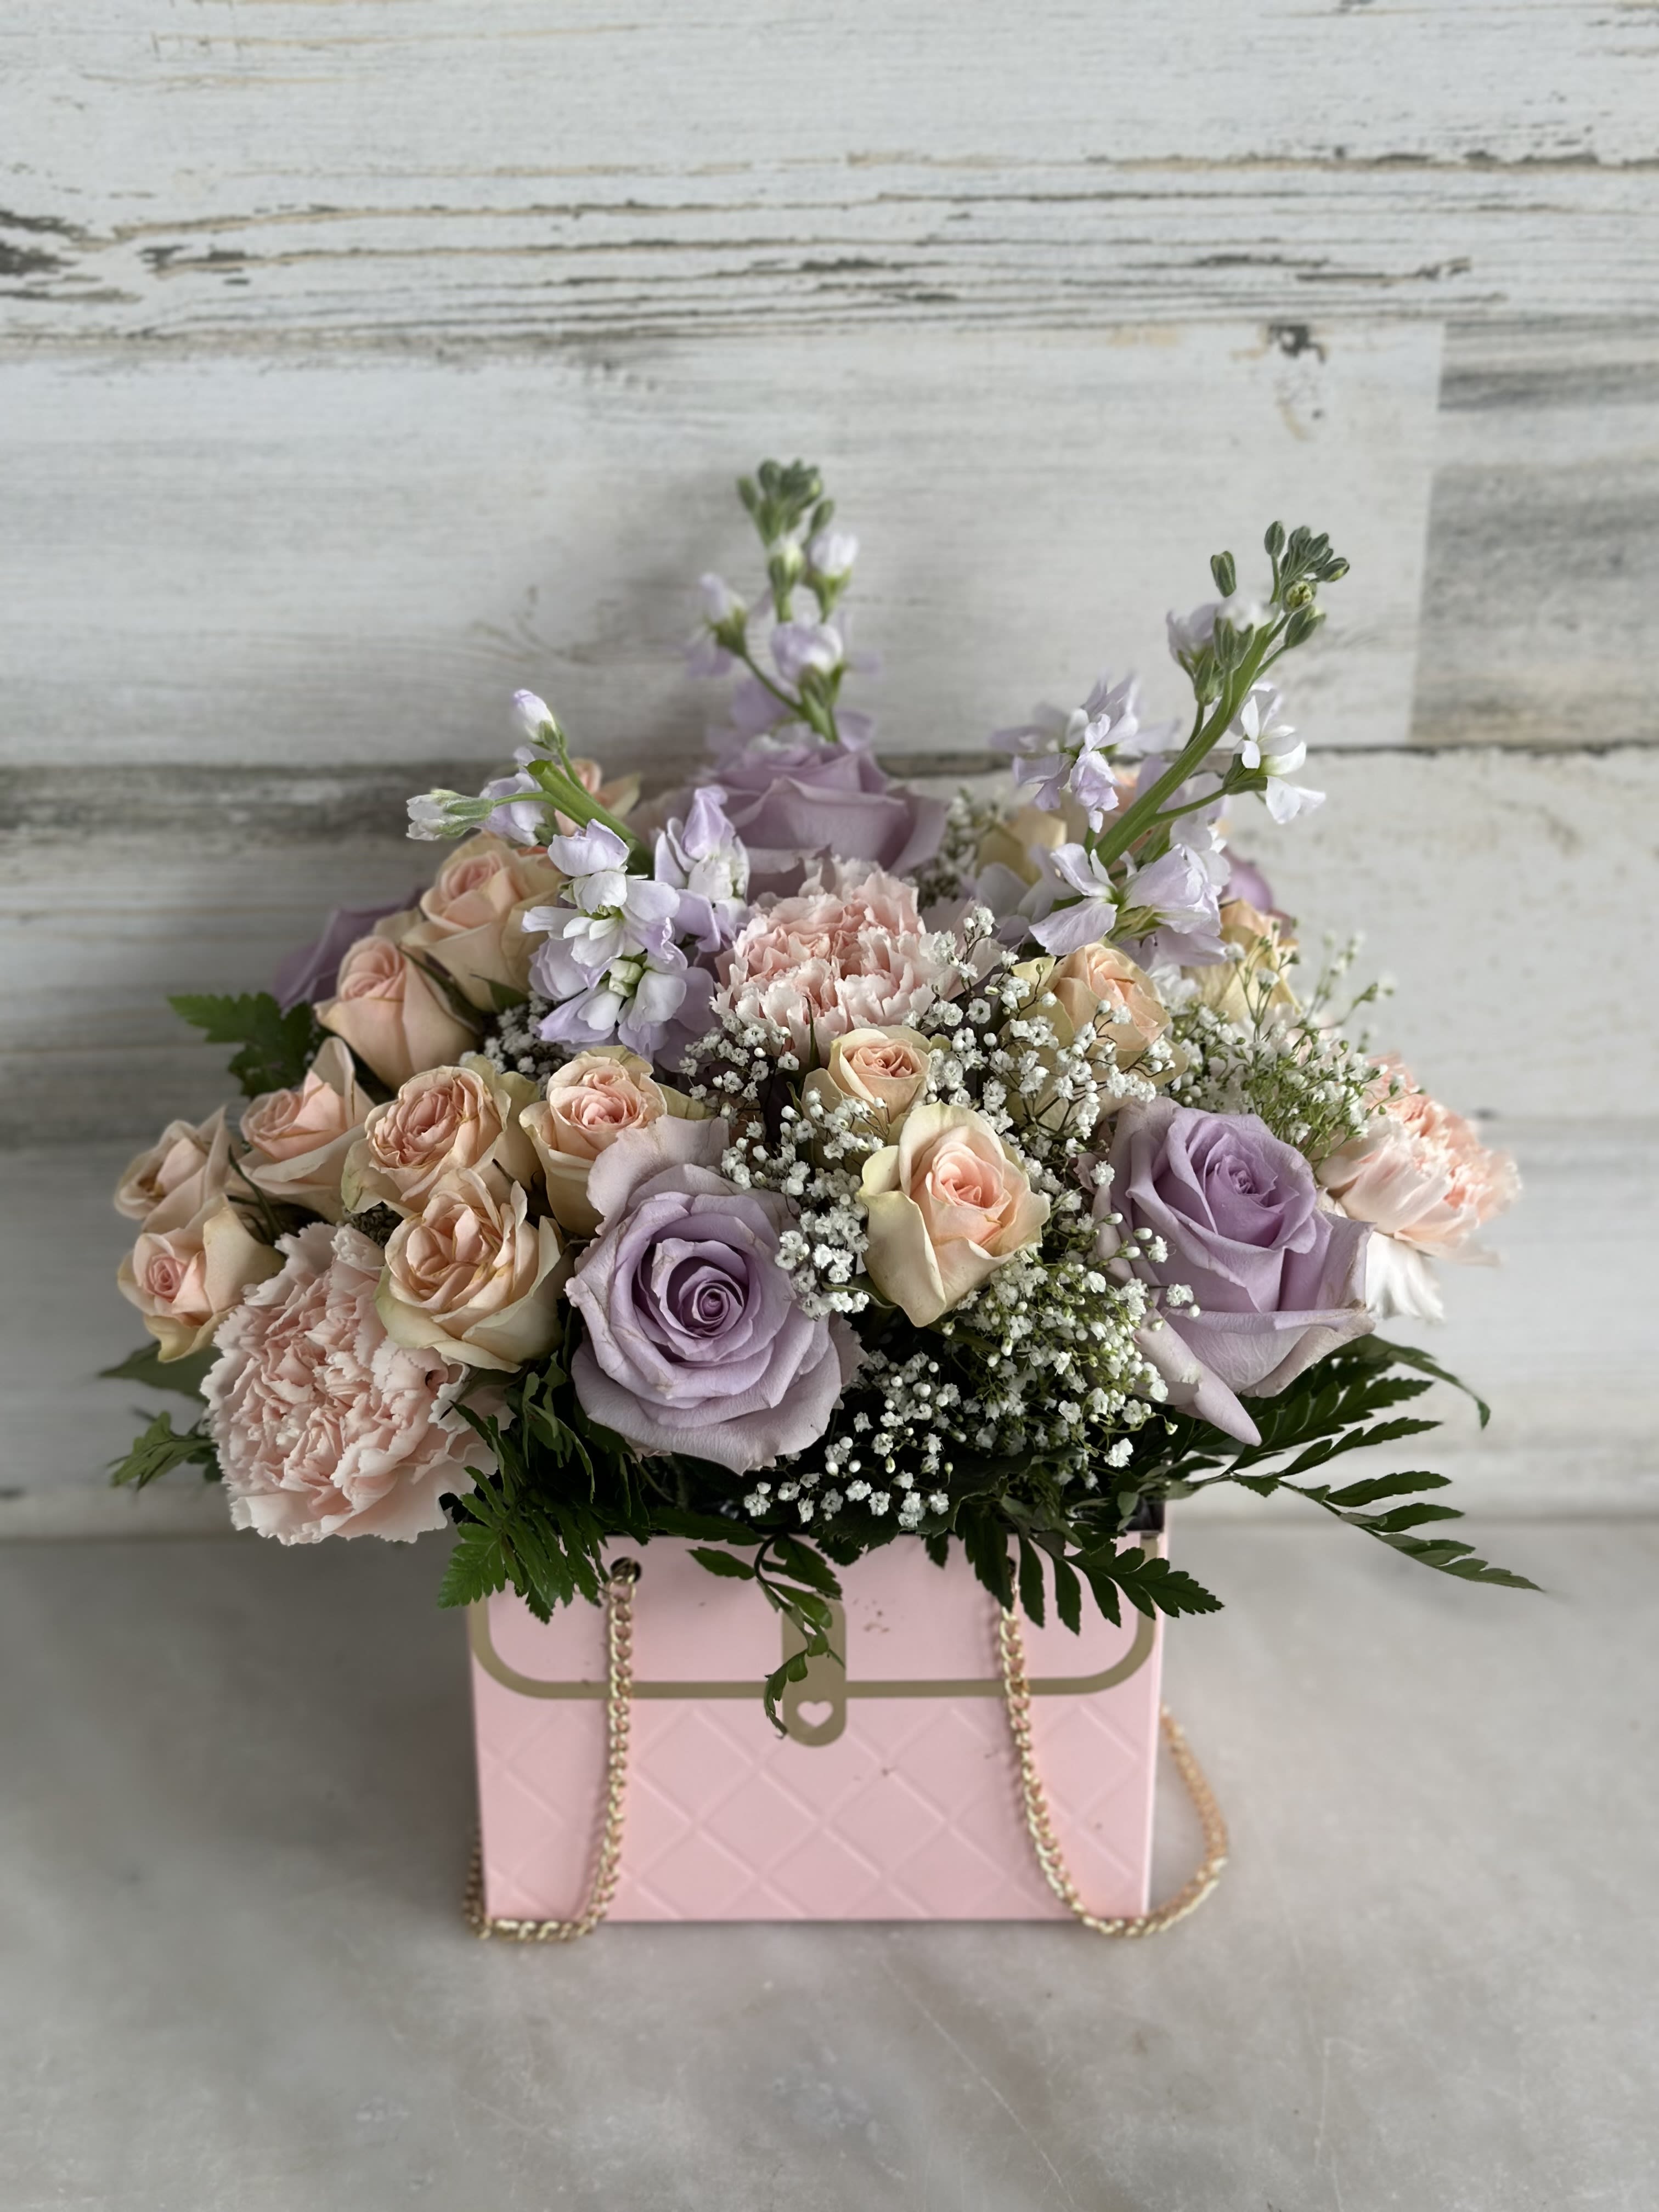 THE PURSE - beautiful pink / white or black purse with flowers such as roses, carnations, spray roses, stocks and some greenery. Choose your color in Special instructions